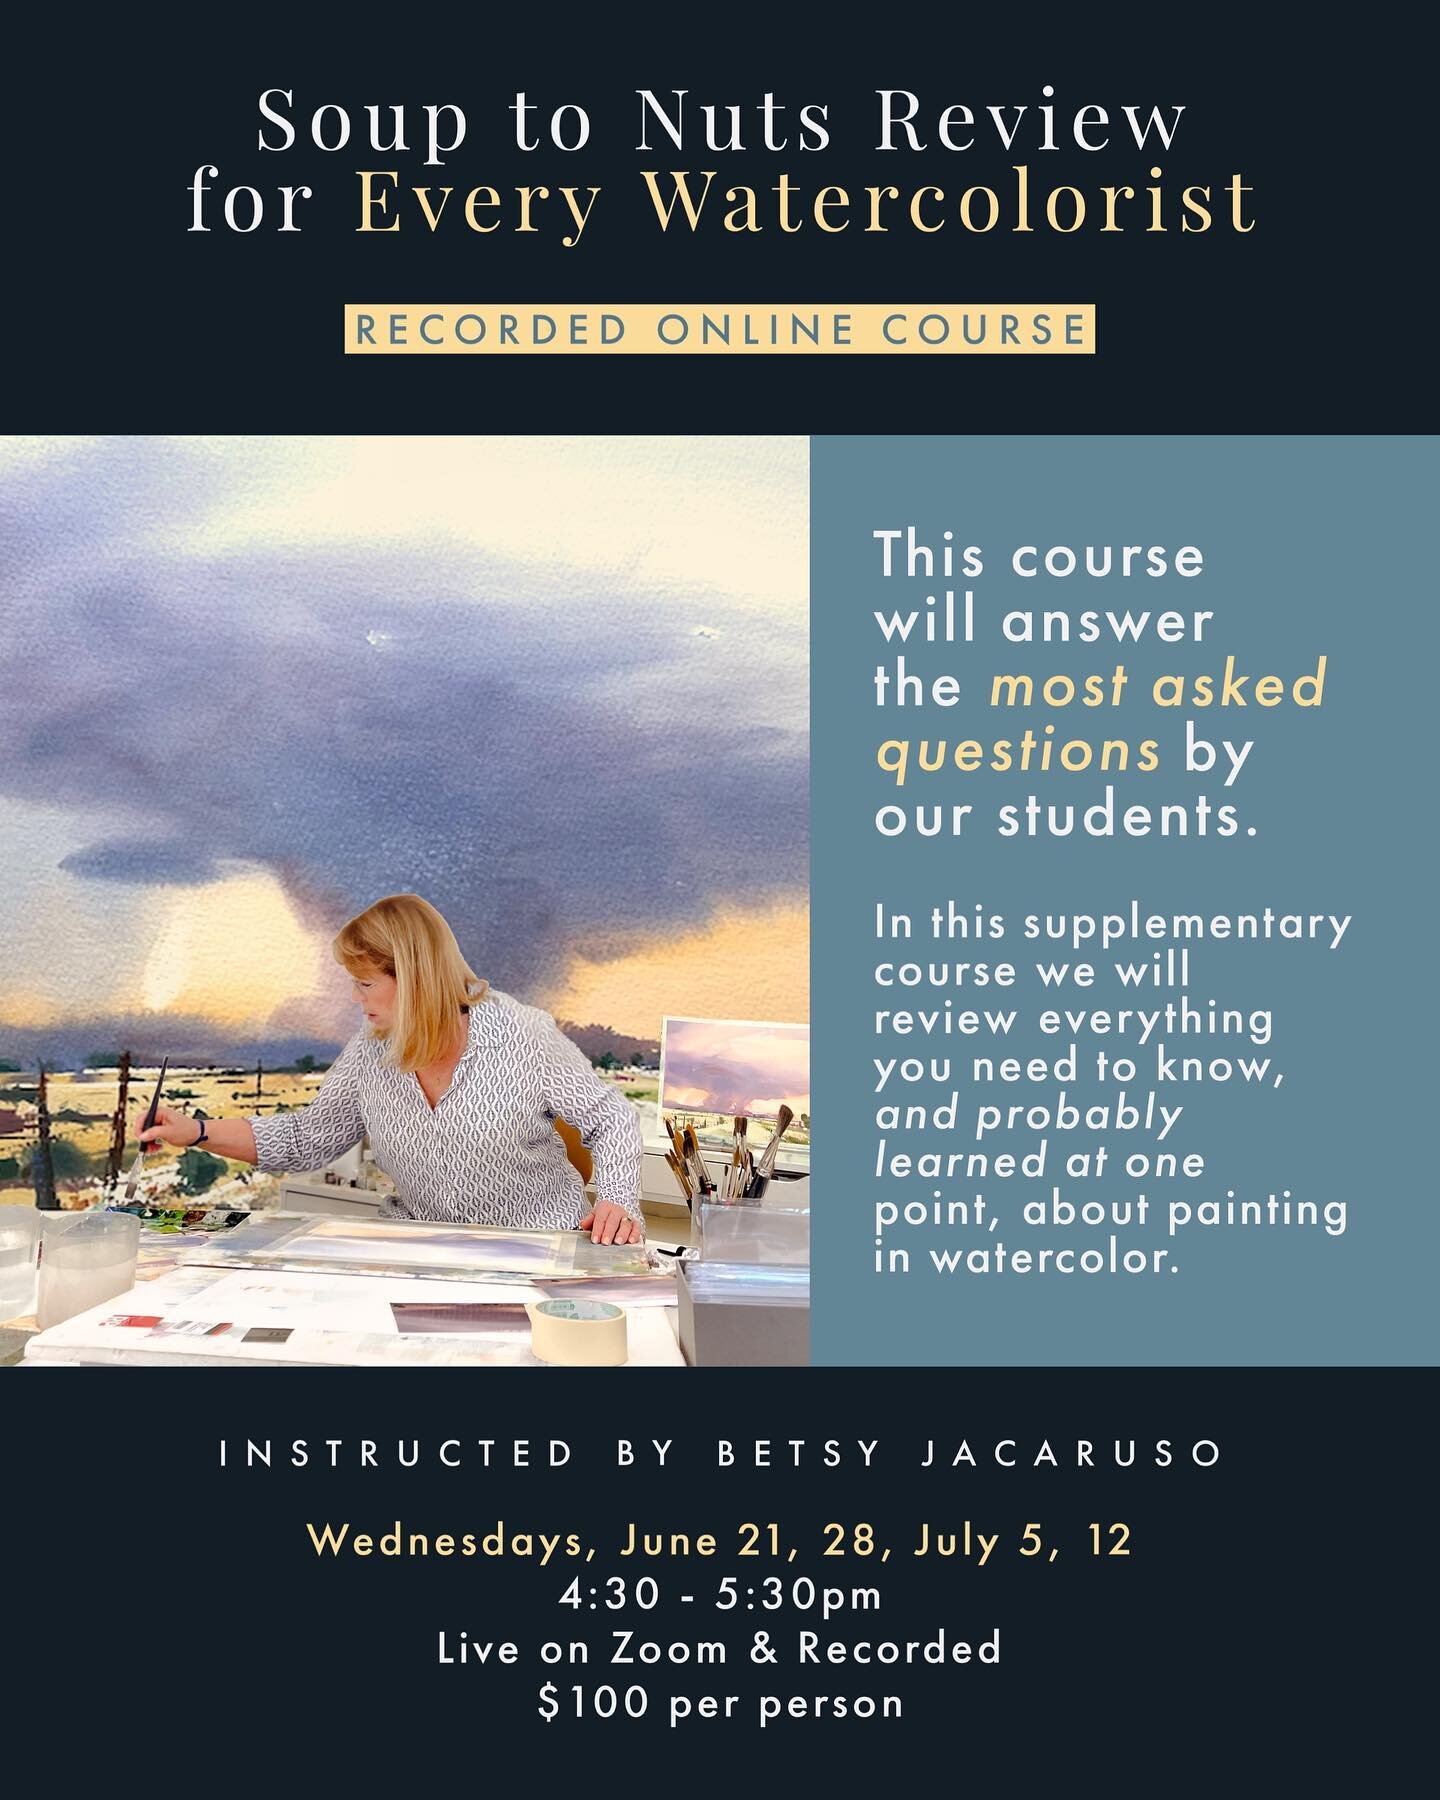 Something new and exciting ✨ The online course that will improve your practice, whether in studio classes or painting in your own. Beginner level or advanced. 
#watercolor #watercolorpainting